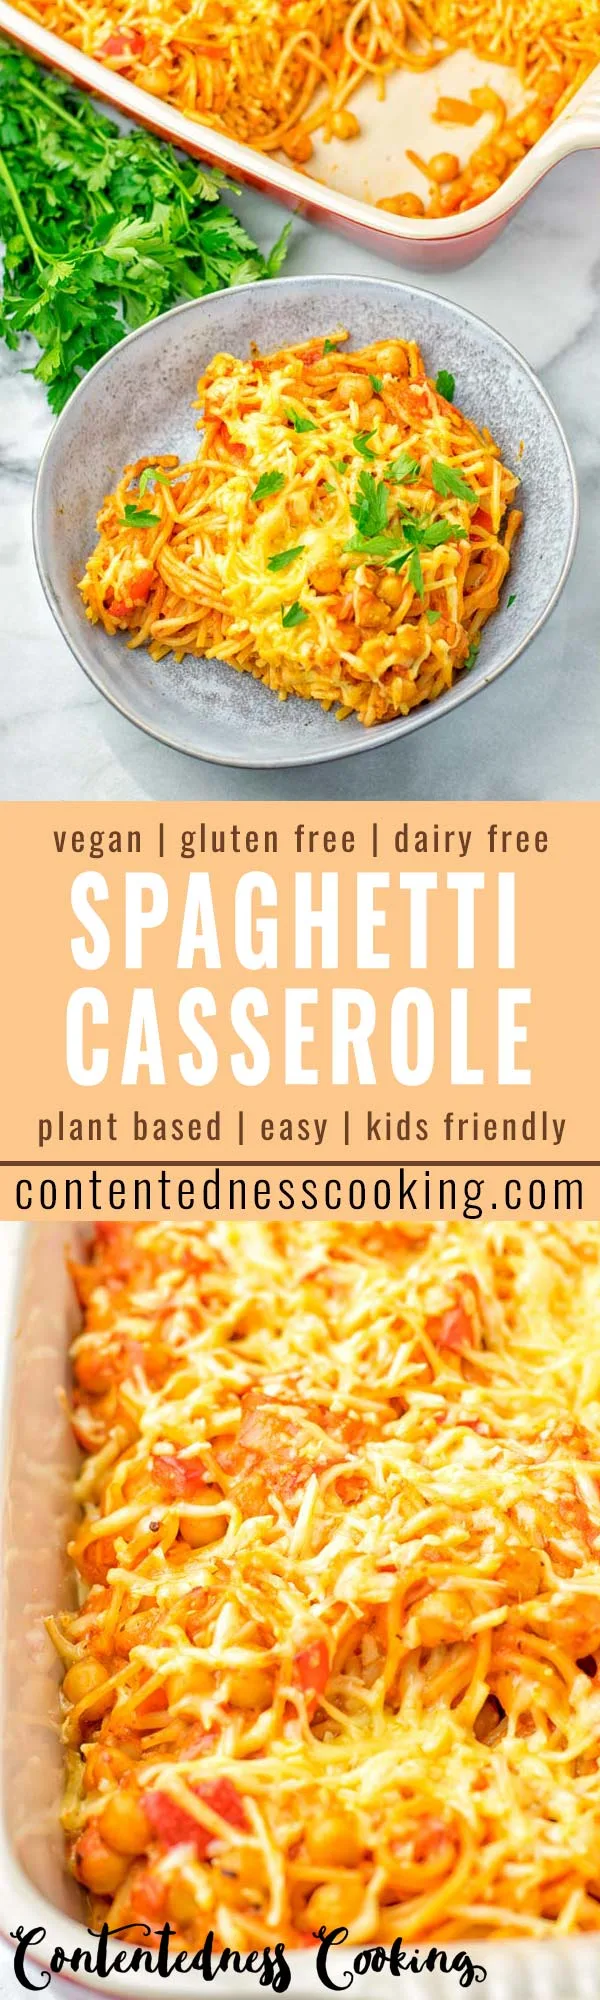 This Spaghetti Casserole is entirely vegan and gluten free. It’s super easy to make and super satisfying for all your dinner, lunch meal prep, work lunch ideas, kid friendly means that the whole family will love. Once you’ve tried it you know you wanna eat it every day. #vegan #dairyfree #glutenfree #vegetarian #contentednesscooking #spaghetticasserole #dinner #lunch #mealprep #worklunchideas #kidfriendlydinners #familydinnerideas #quickeasydinner 